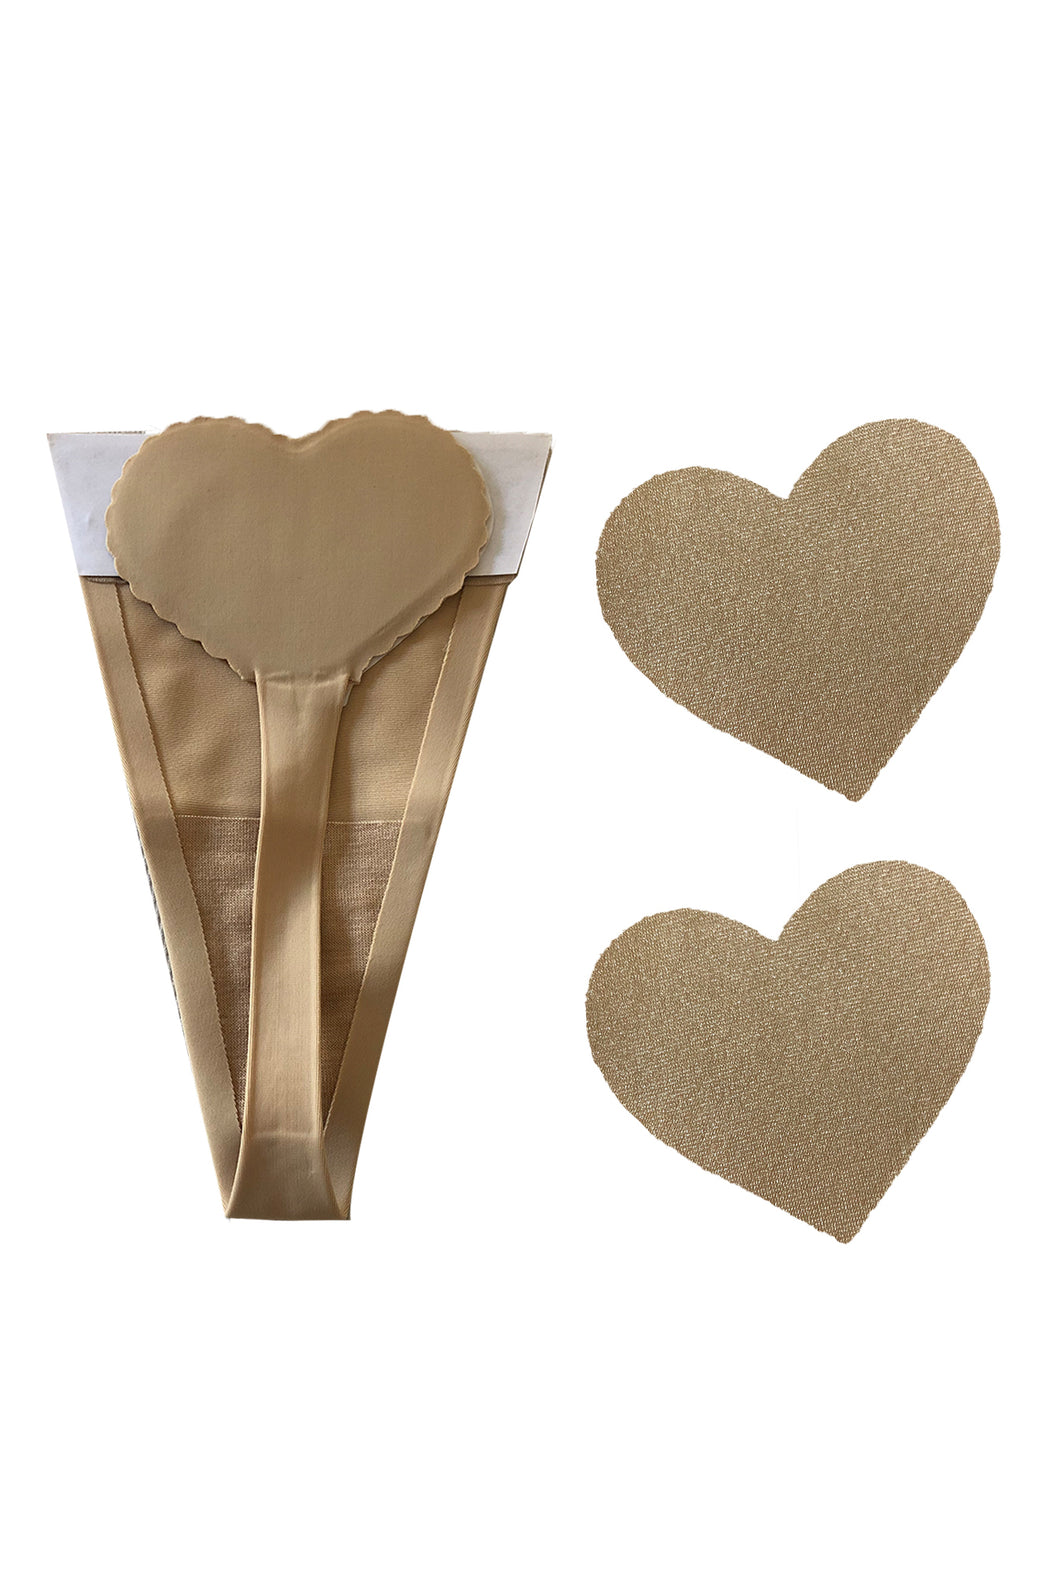 Nude Heart Invisi Knix Thong With Nipztix Pasties